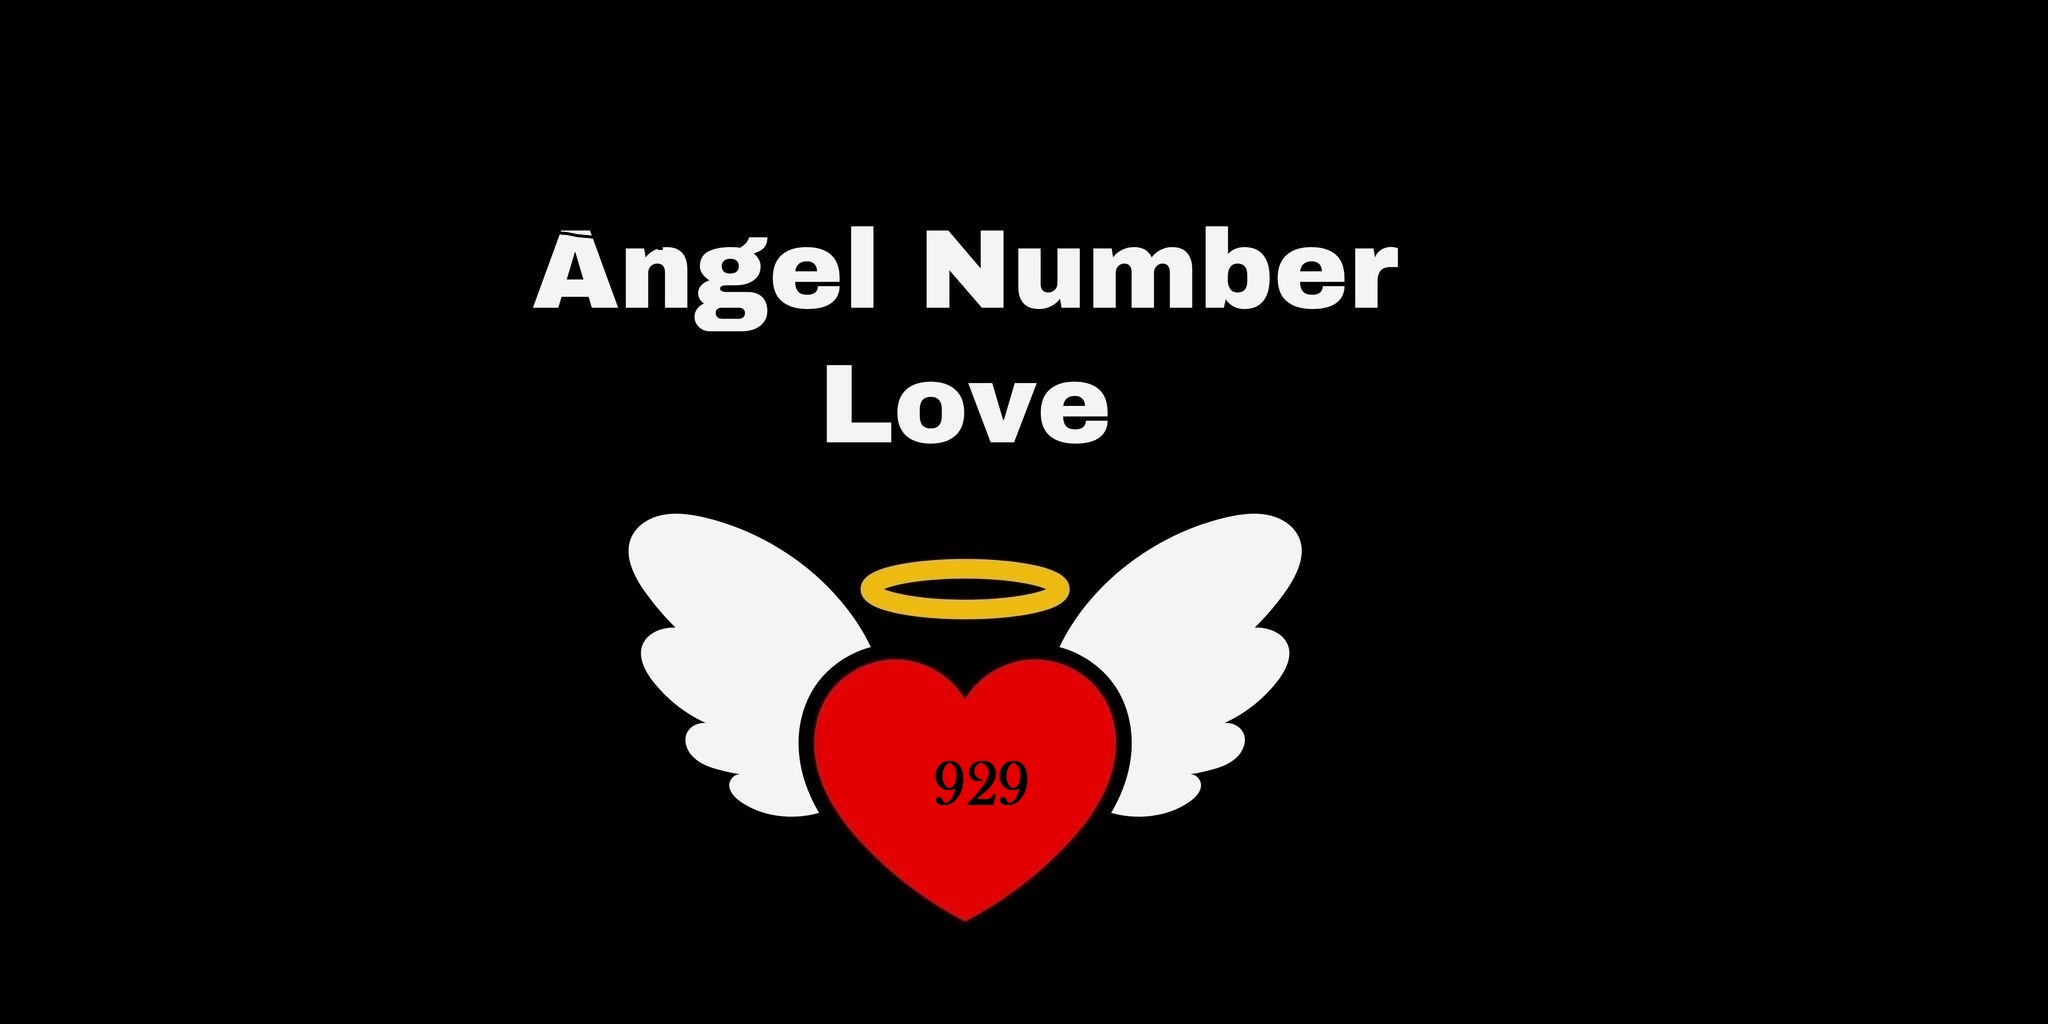 929 Angel Number Meaning In Love & Relationship